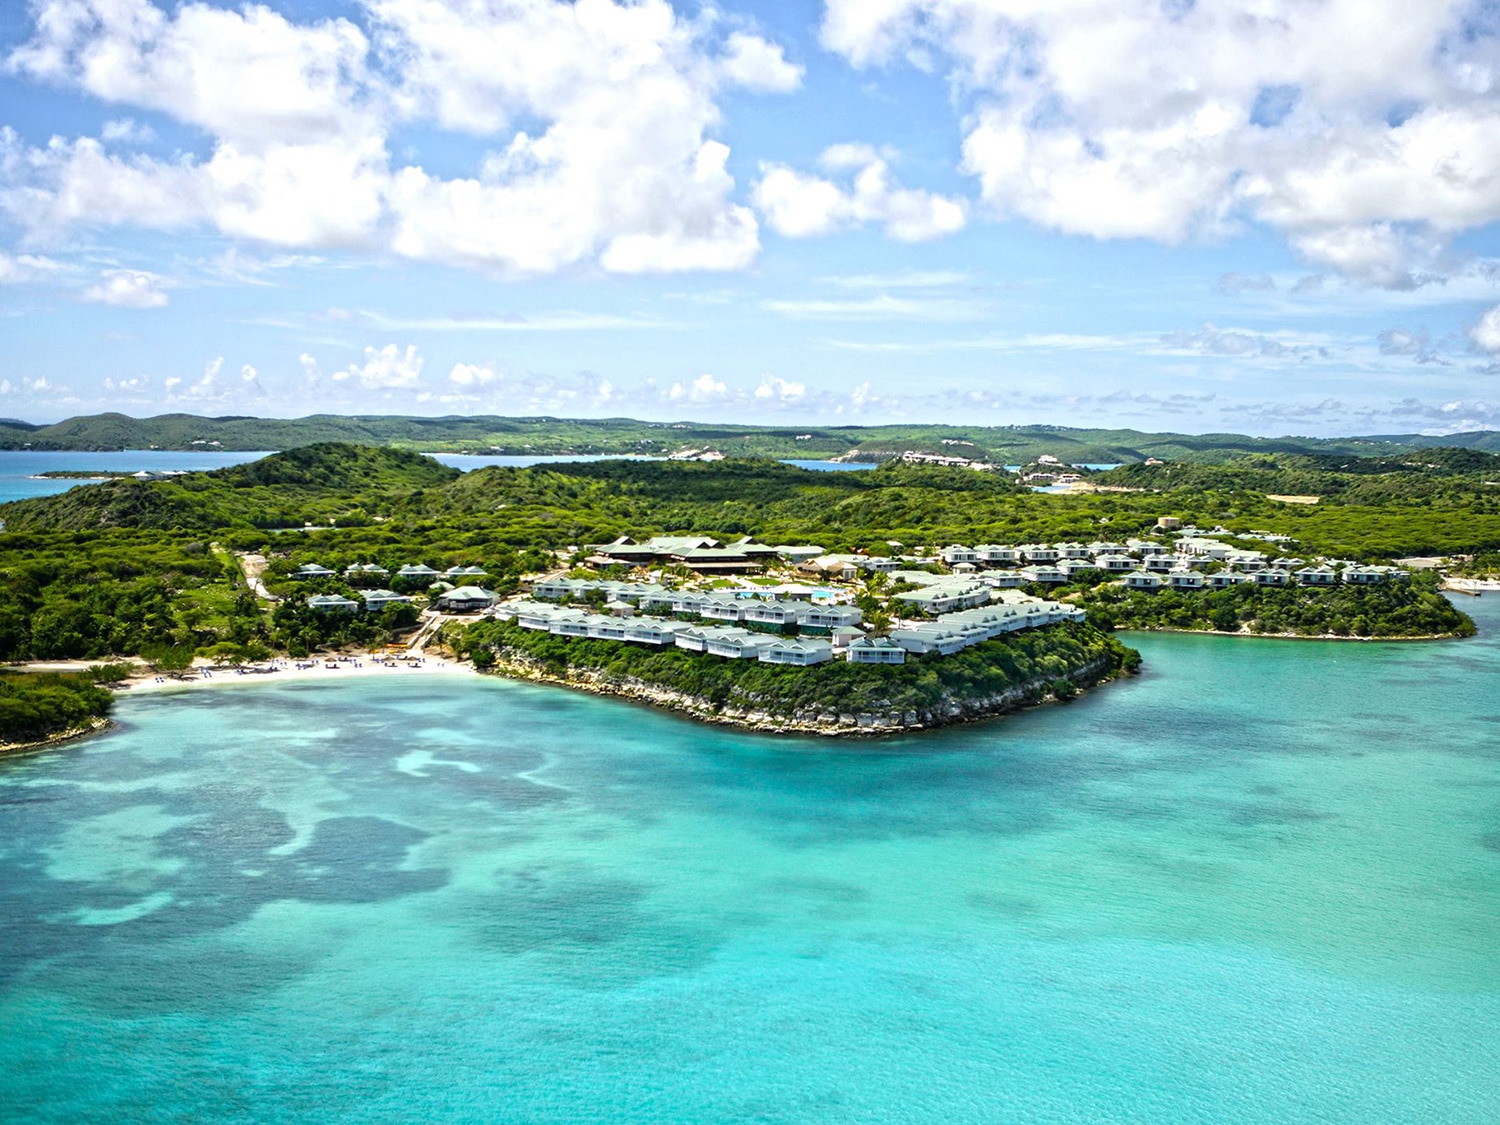 Aerial view of Verandah Resort and Spa, a family-friendly all-inclusive getaway in the Eastern Caribbean.